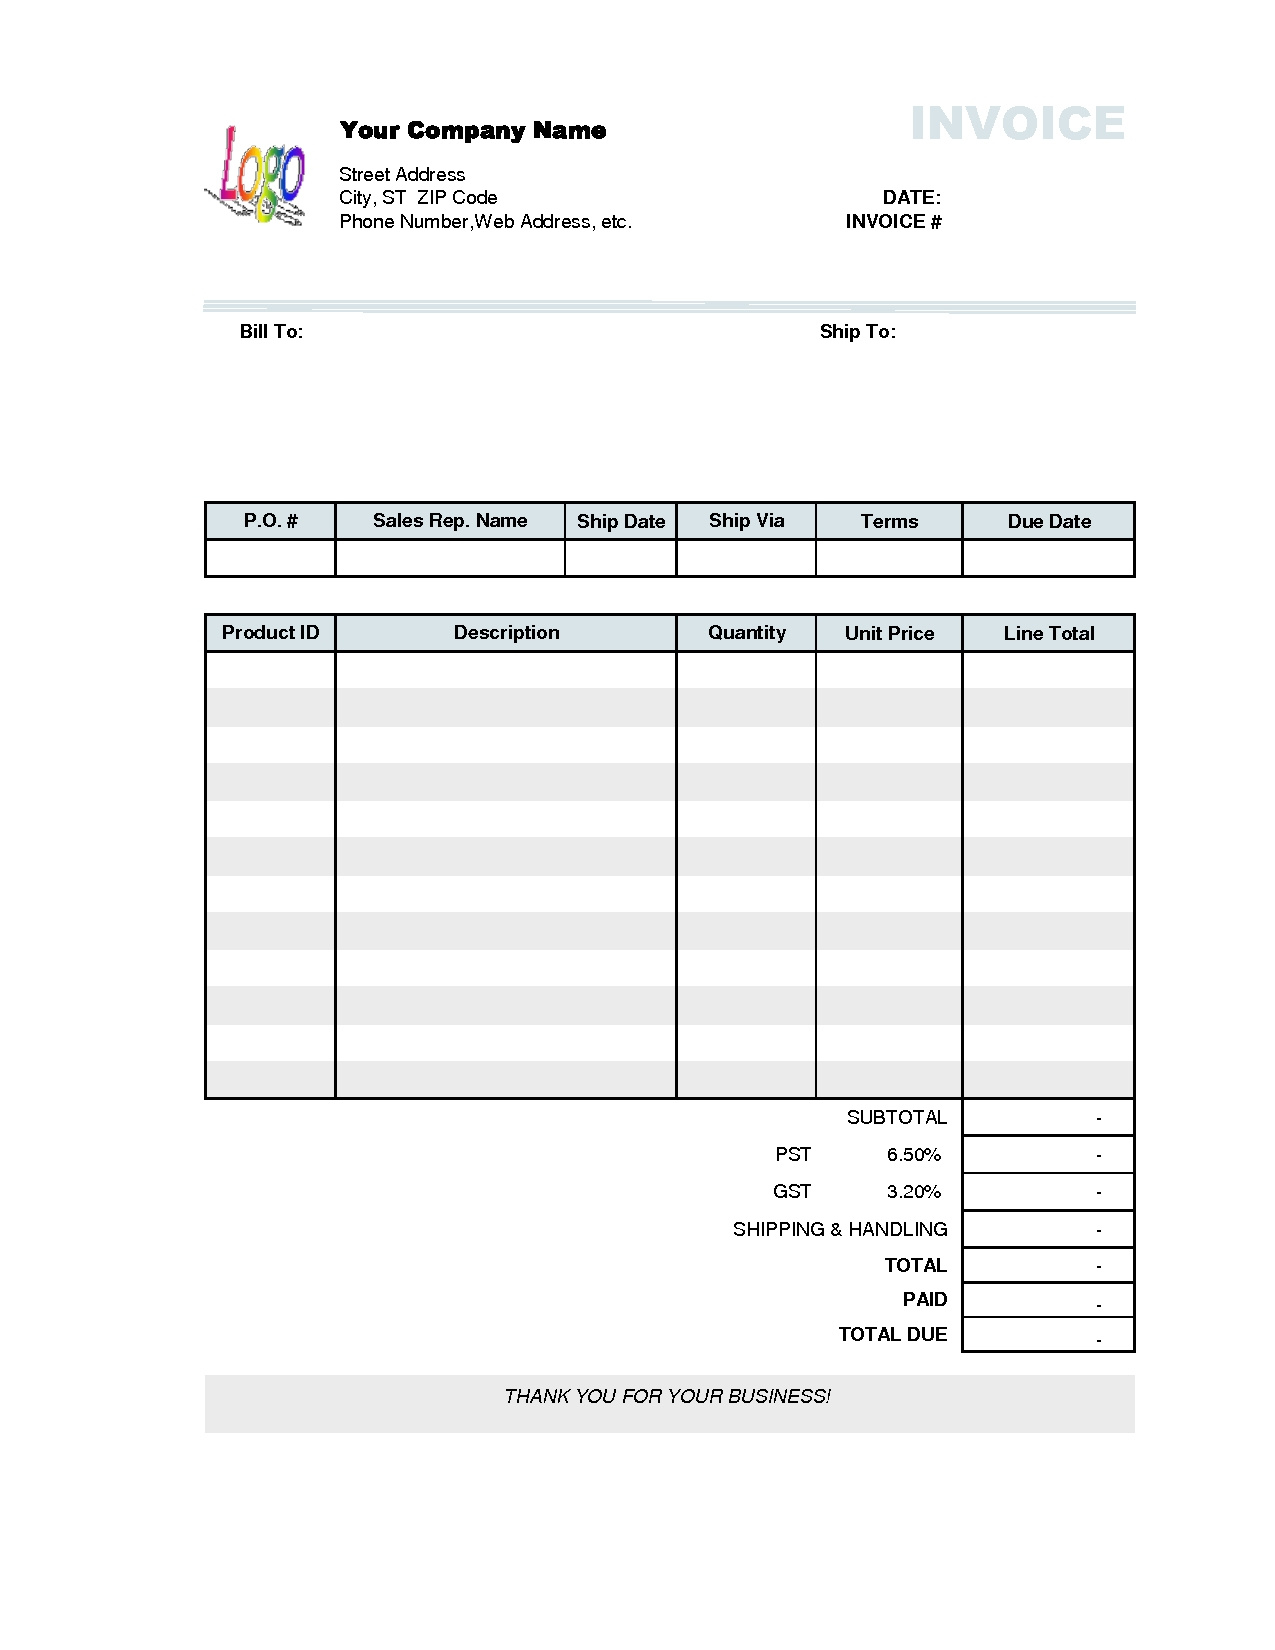 Small Business Invoice Software Reviews Invoice Template Regarding Business Invoice Template Uk